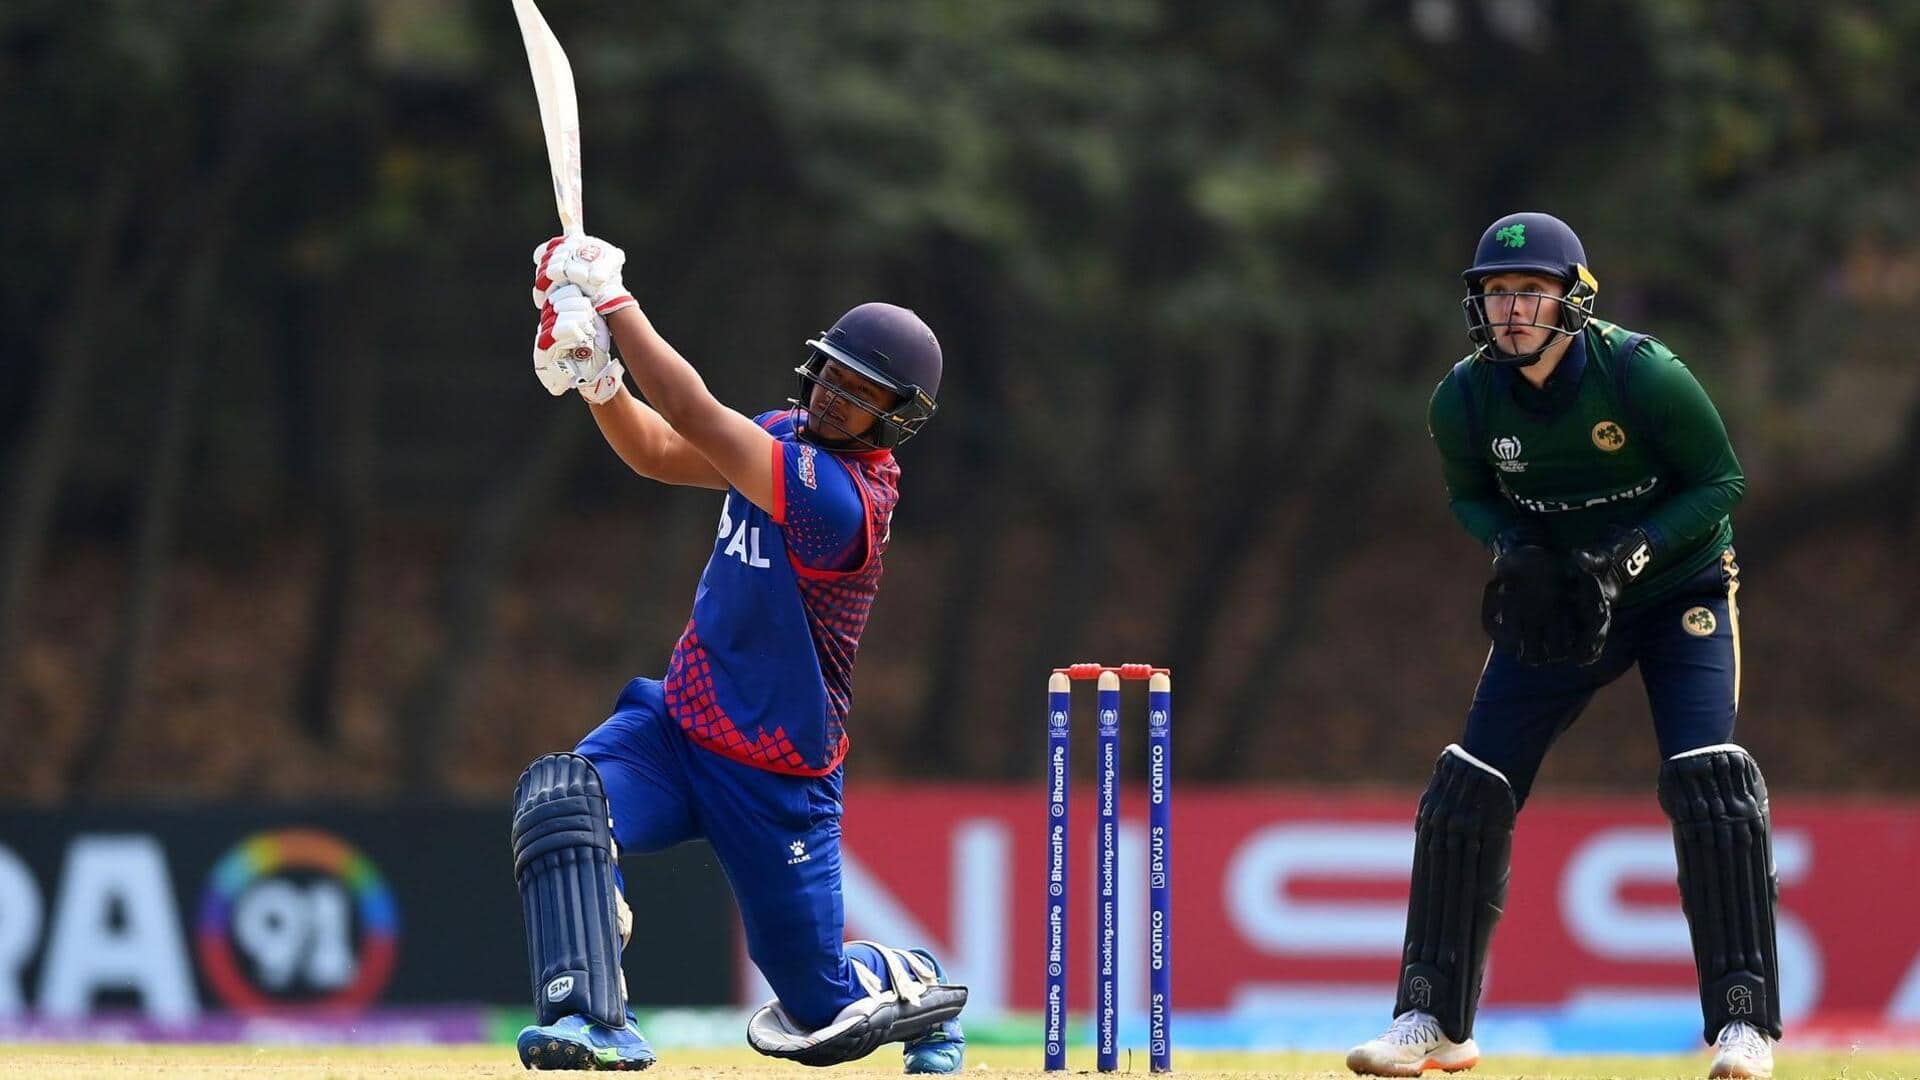 Asian Games: Nepal smash T20I records with win over Mongolia